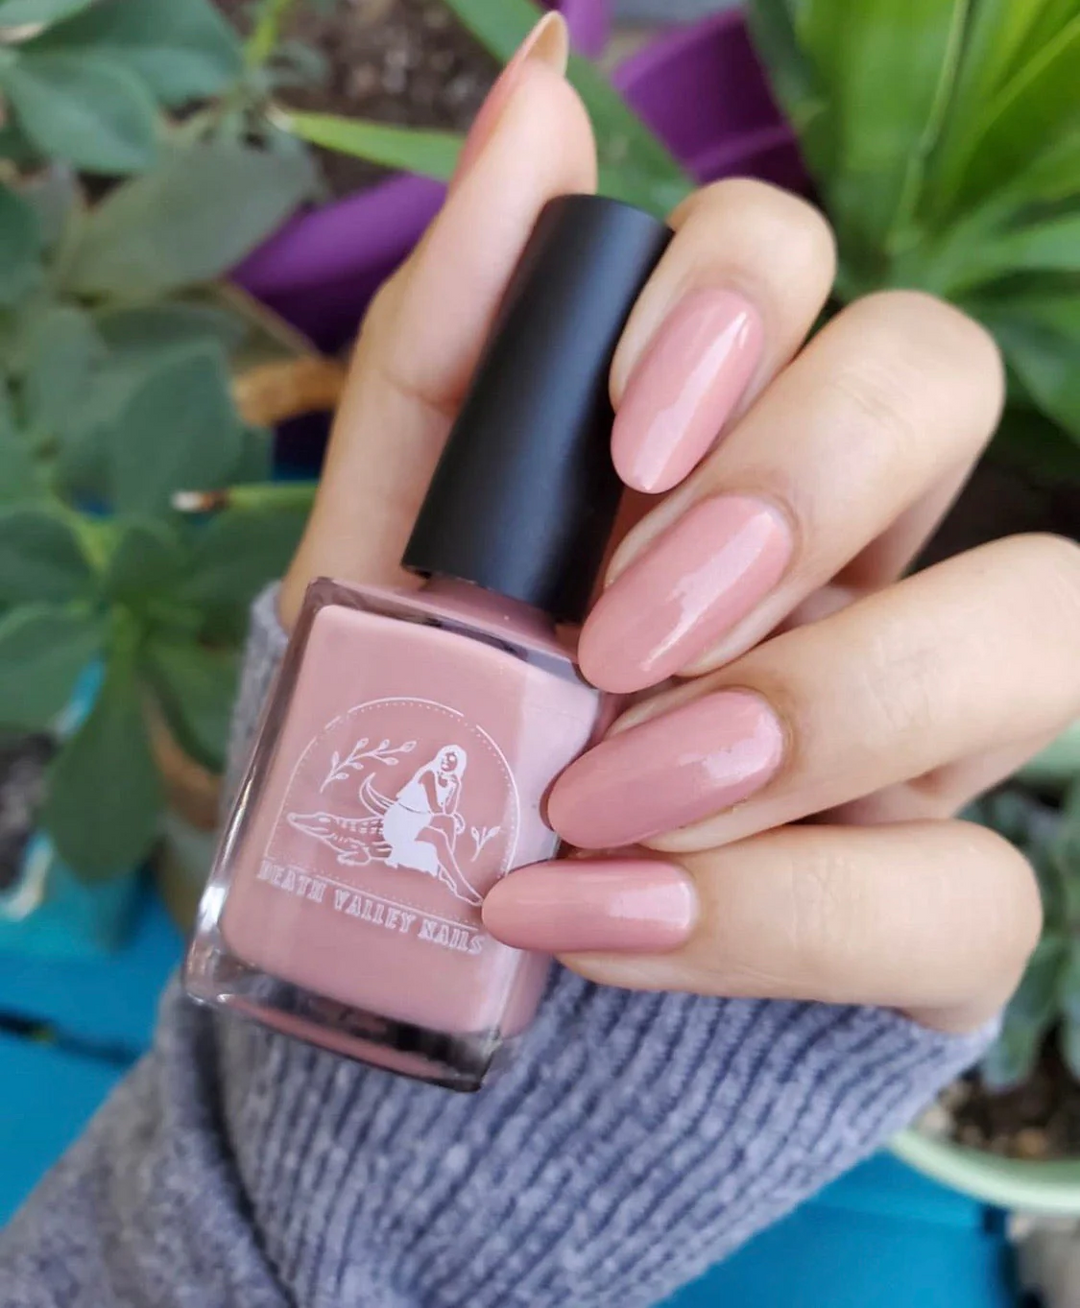 Death Valley Nails - Panhandle Pink